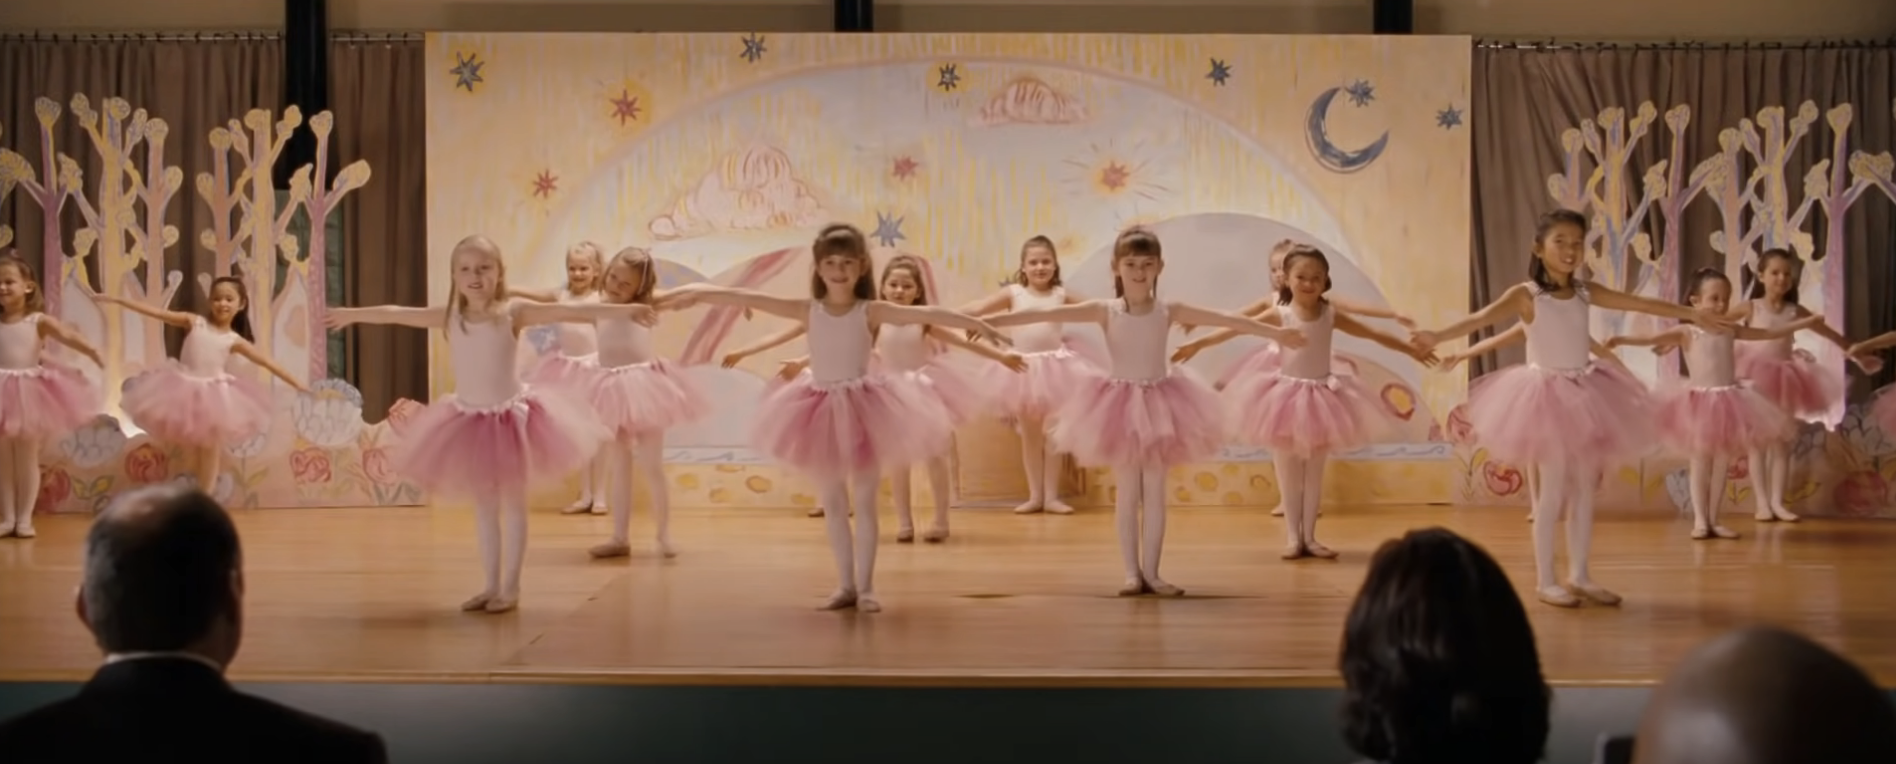 small children performing ballet onstage